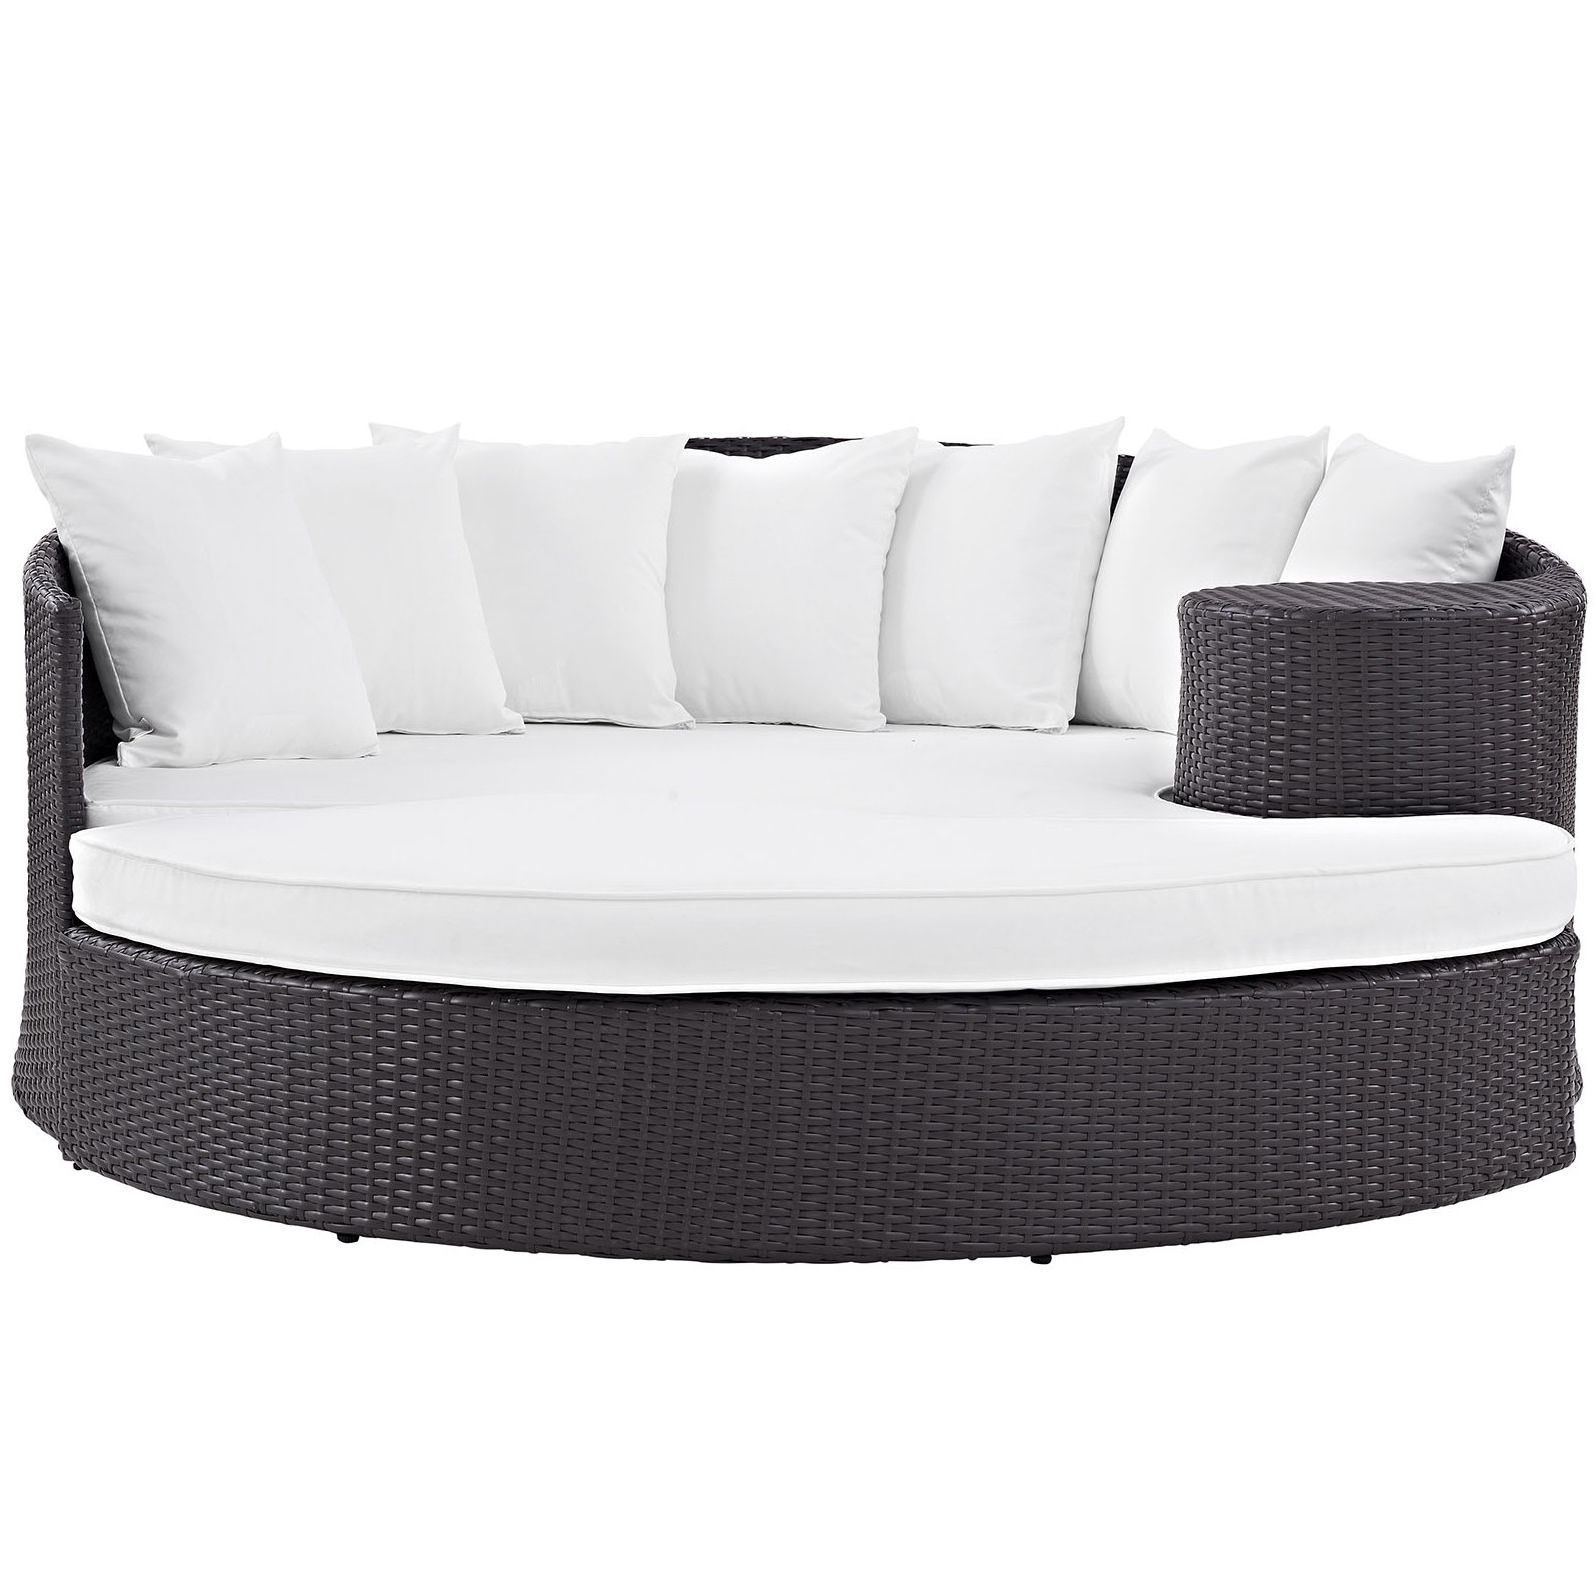 Brentwood Patio Daybed With Cushions Intended For Widely Used Tripp Patio Daybeds With Cushions (View 11 of 20)